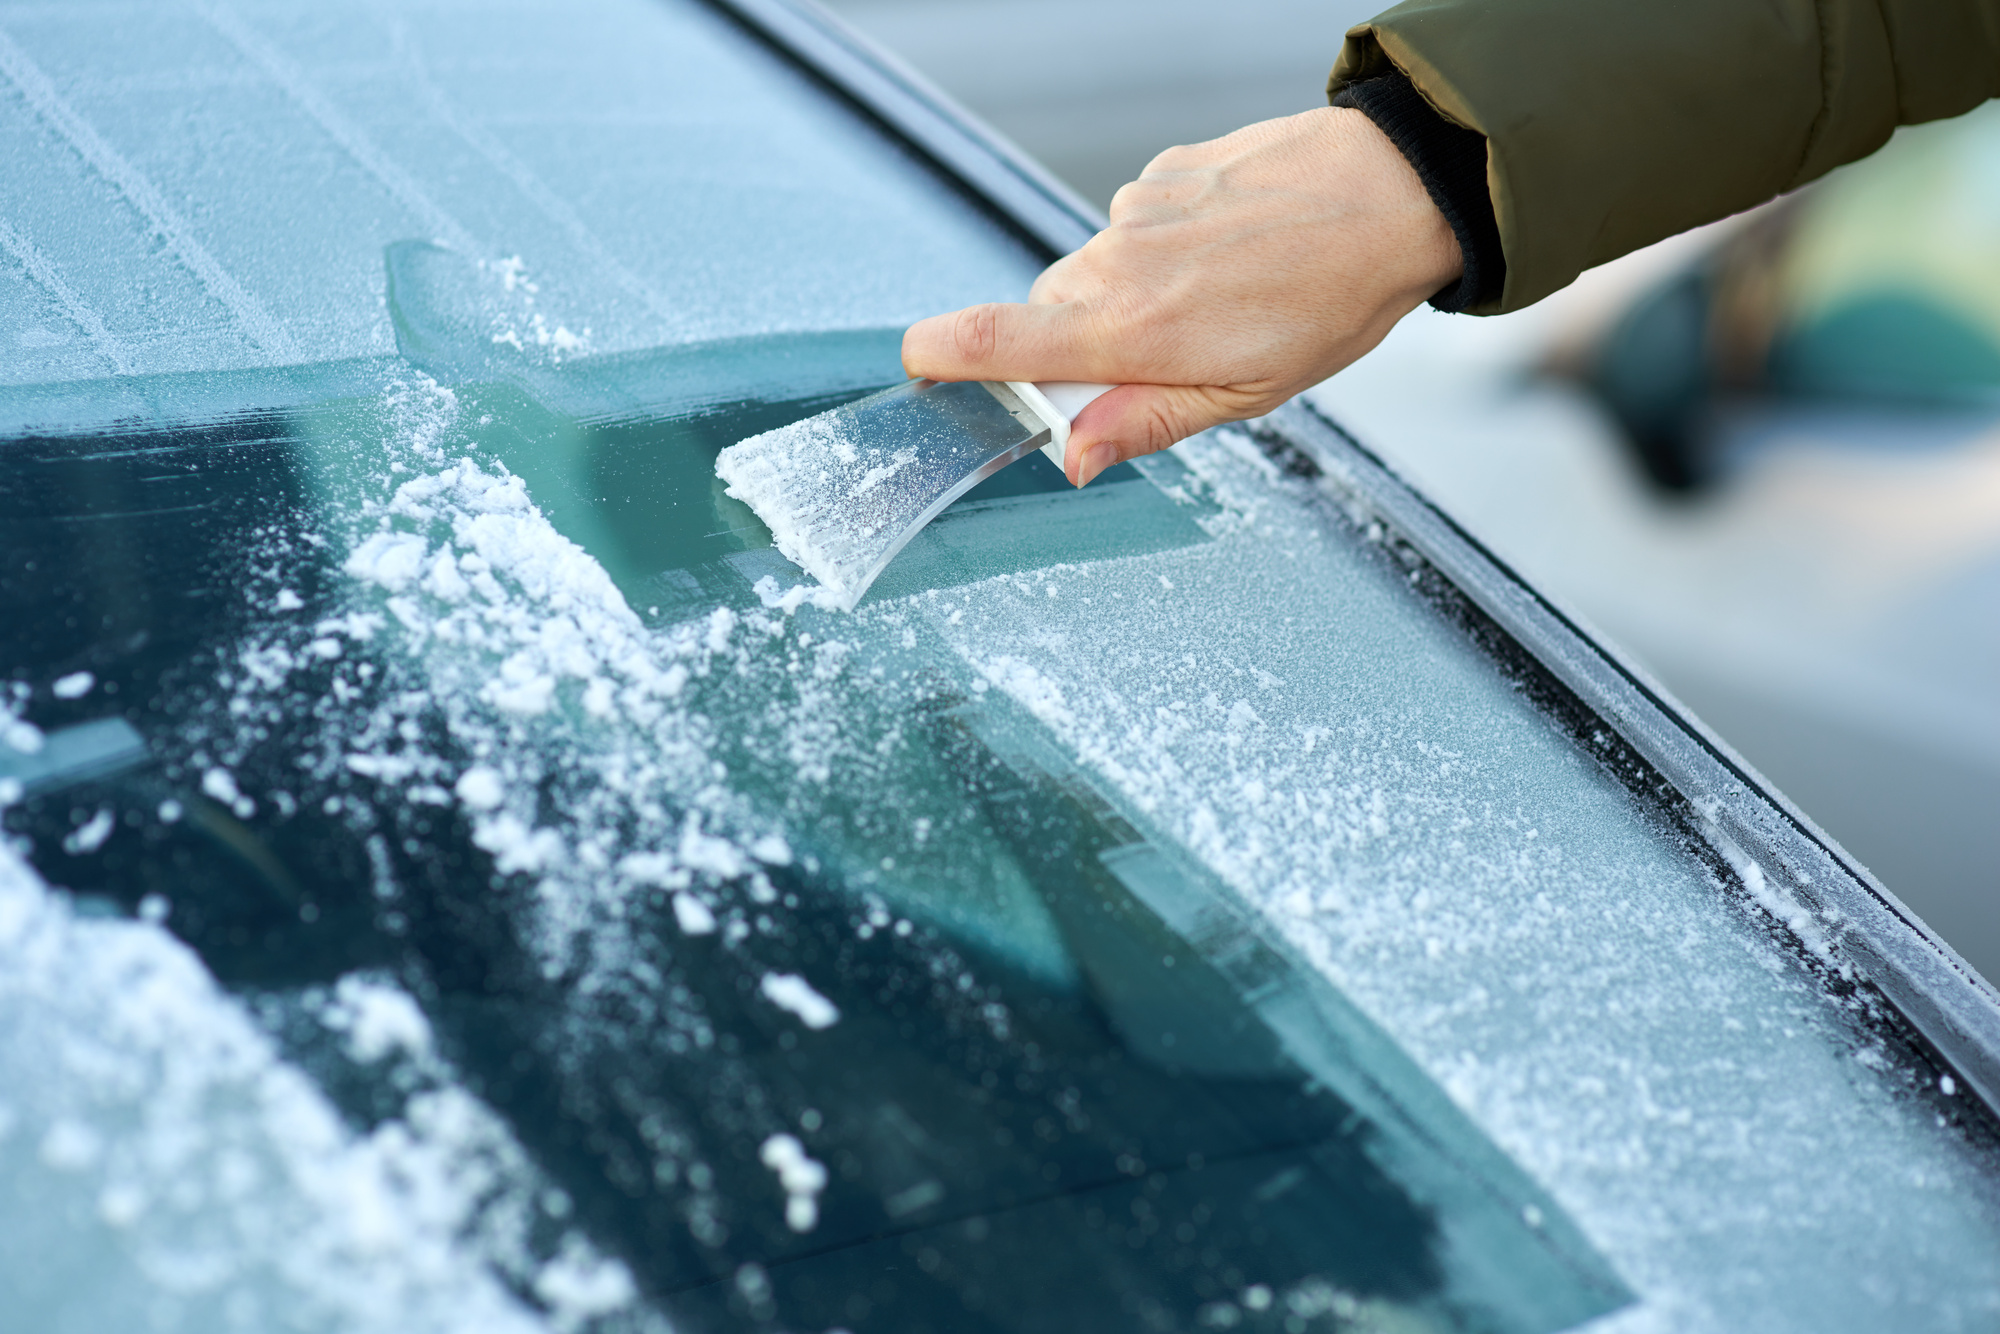 Put Down the Scraper: How to Prevent Ice on Windshields